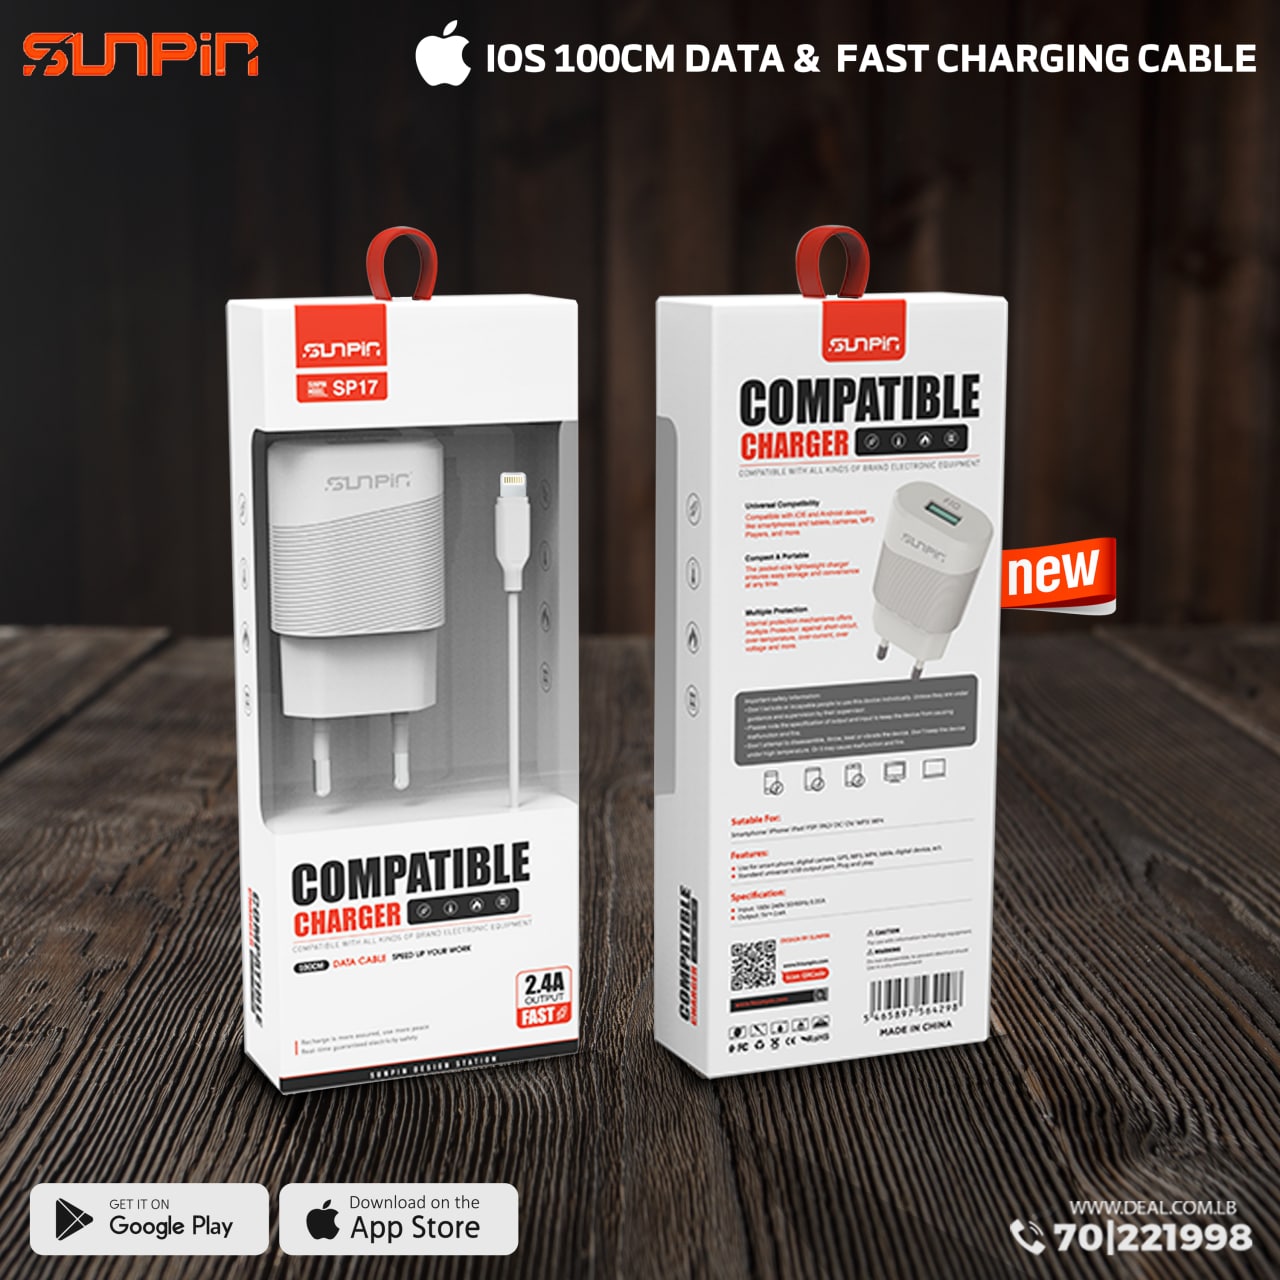 SUNPIN SP17 IOS 100CM DATA &  FAST CHARGING CABLE